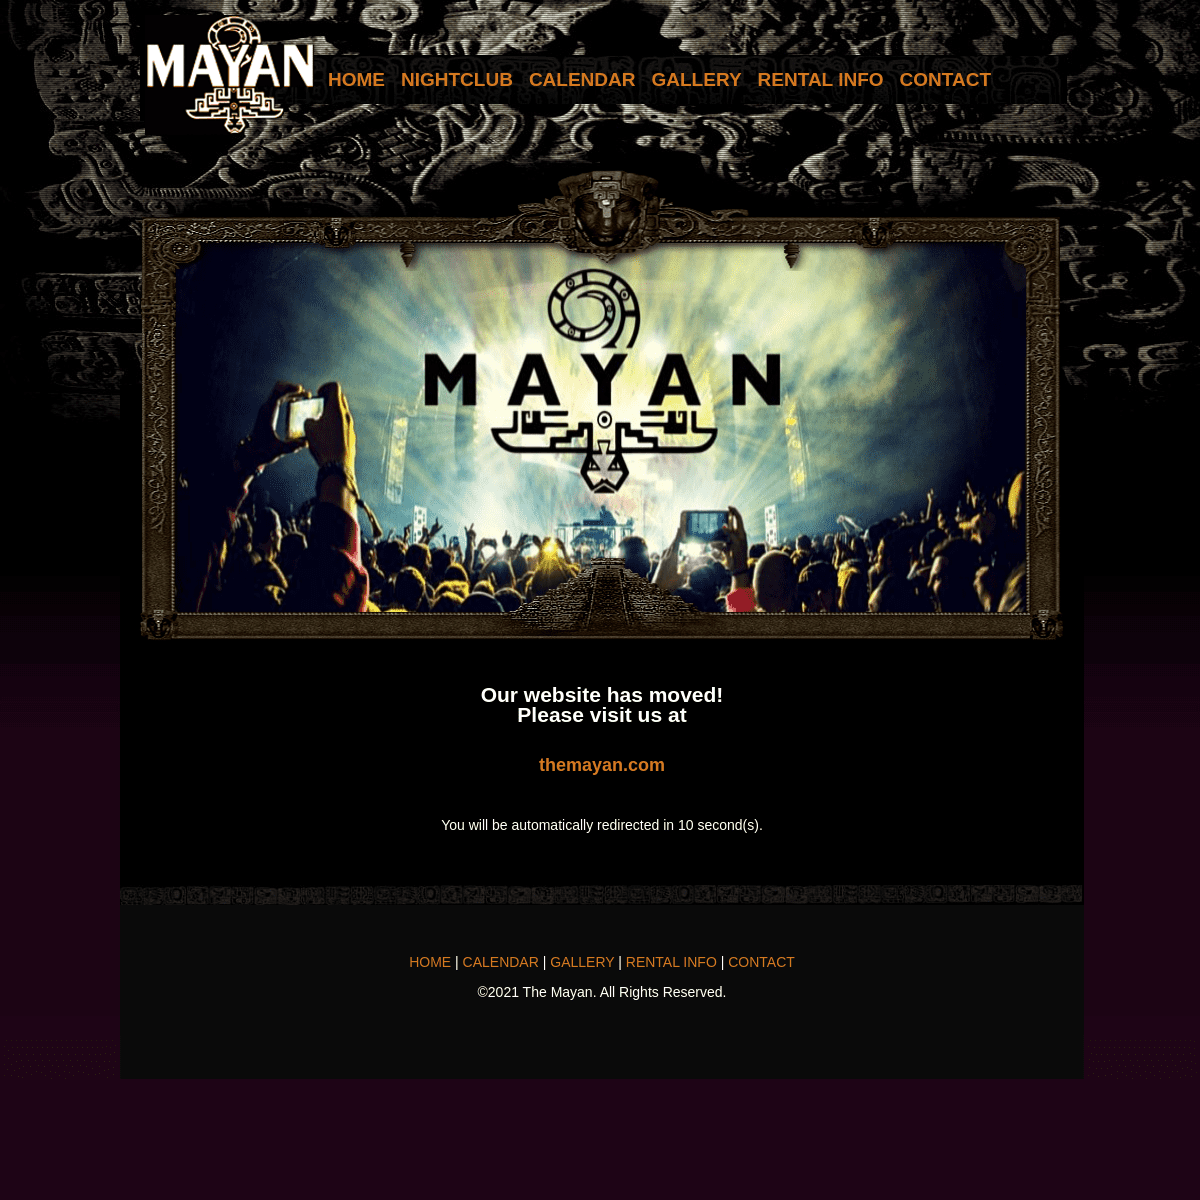 A complete backup of https://clubmayan.com